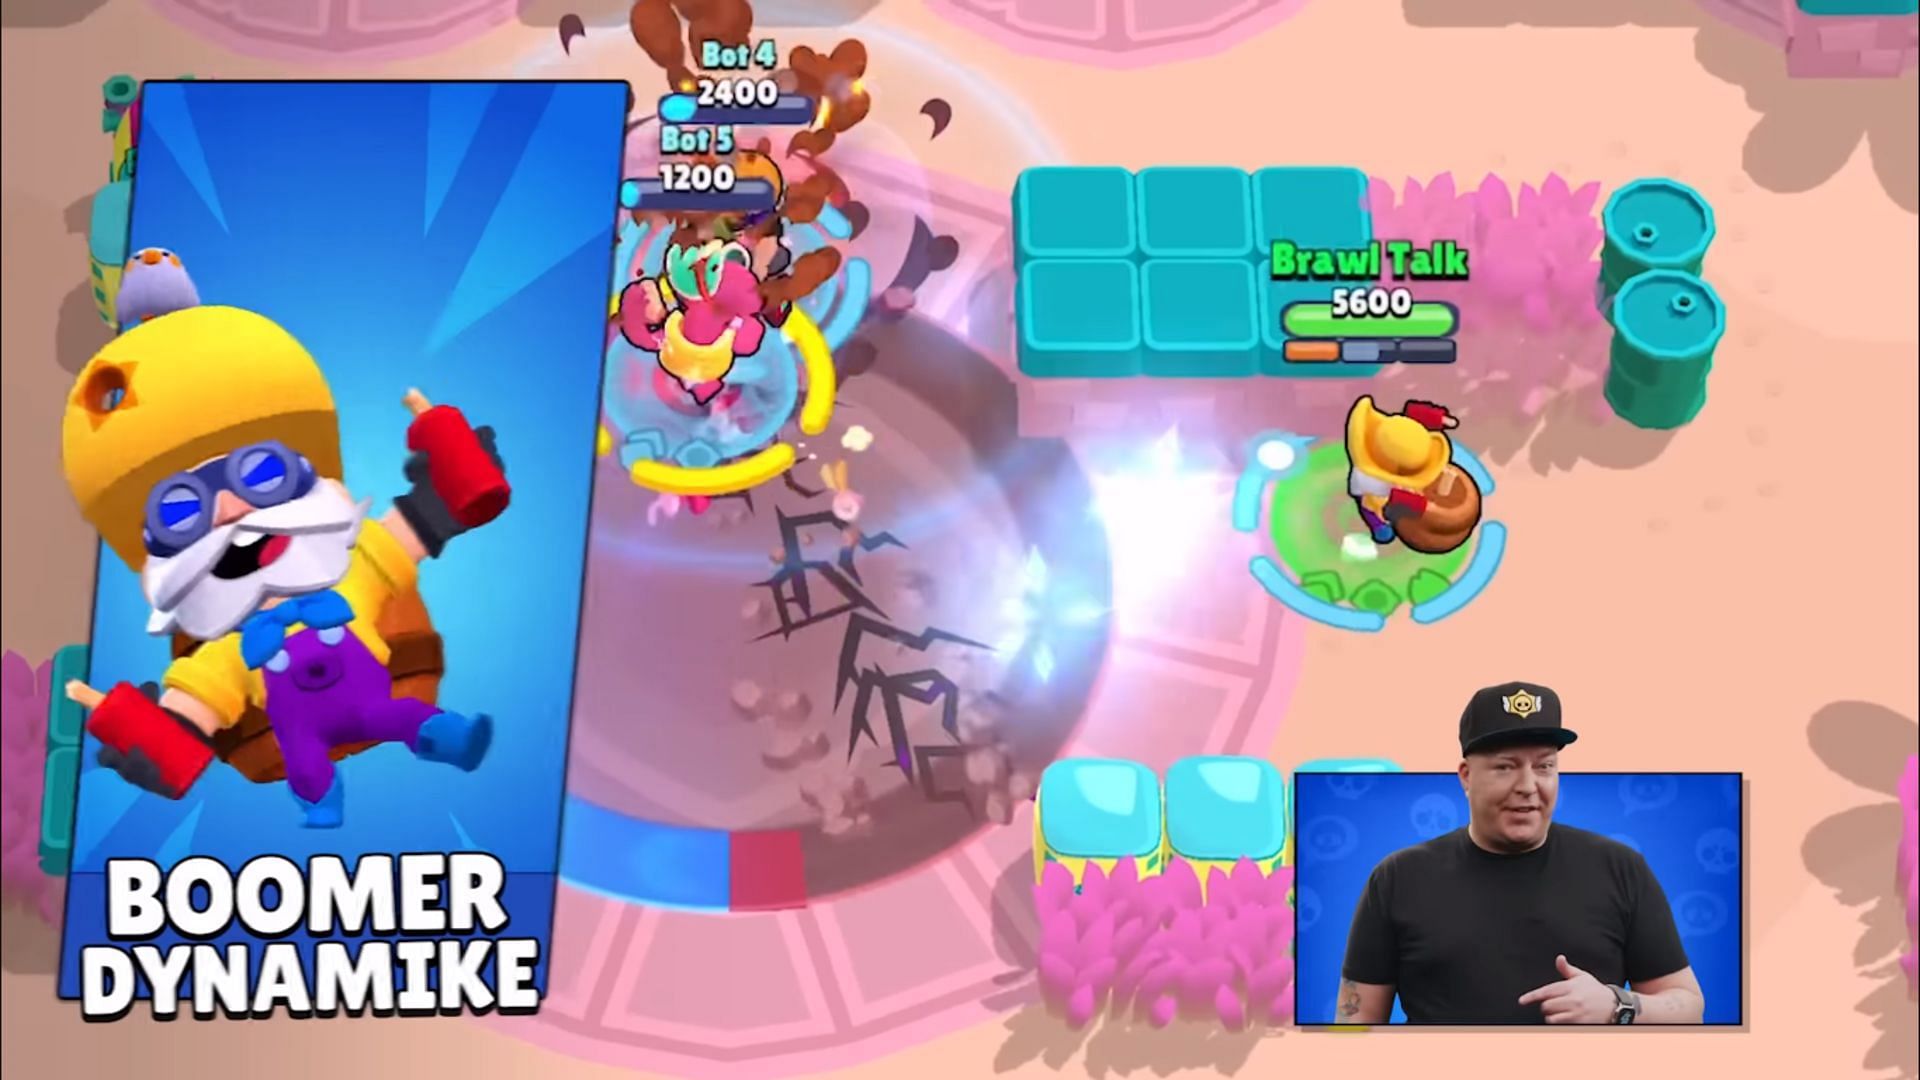 Boomer Dynamike (Image via Supercell)